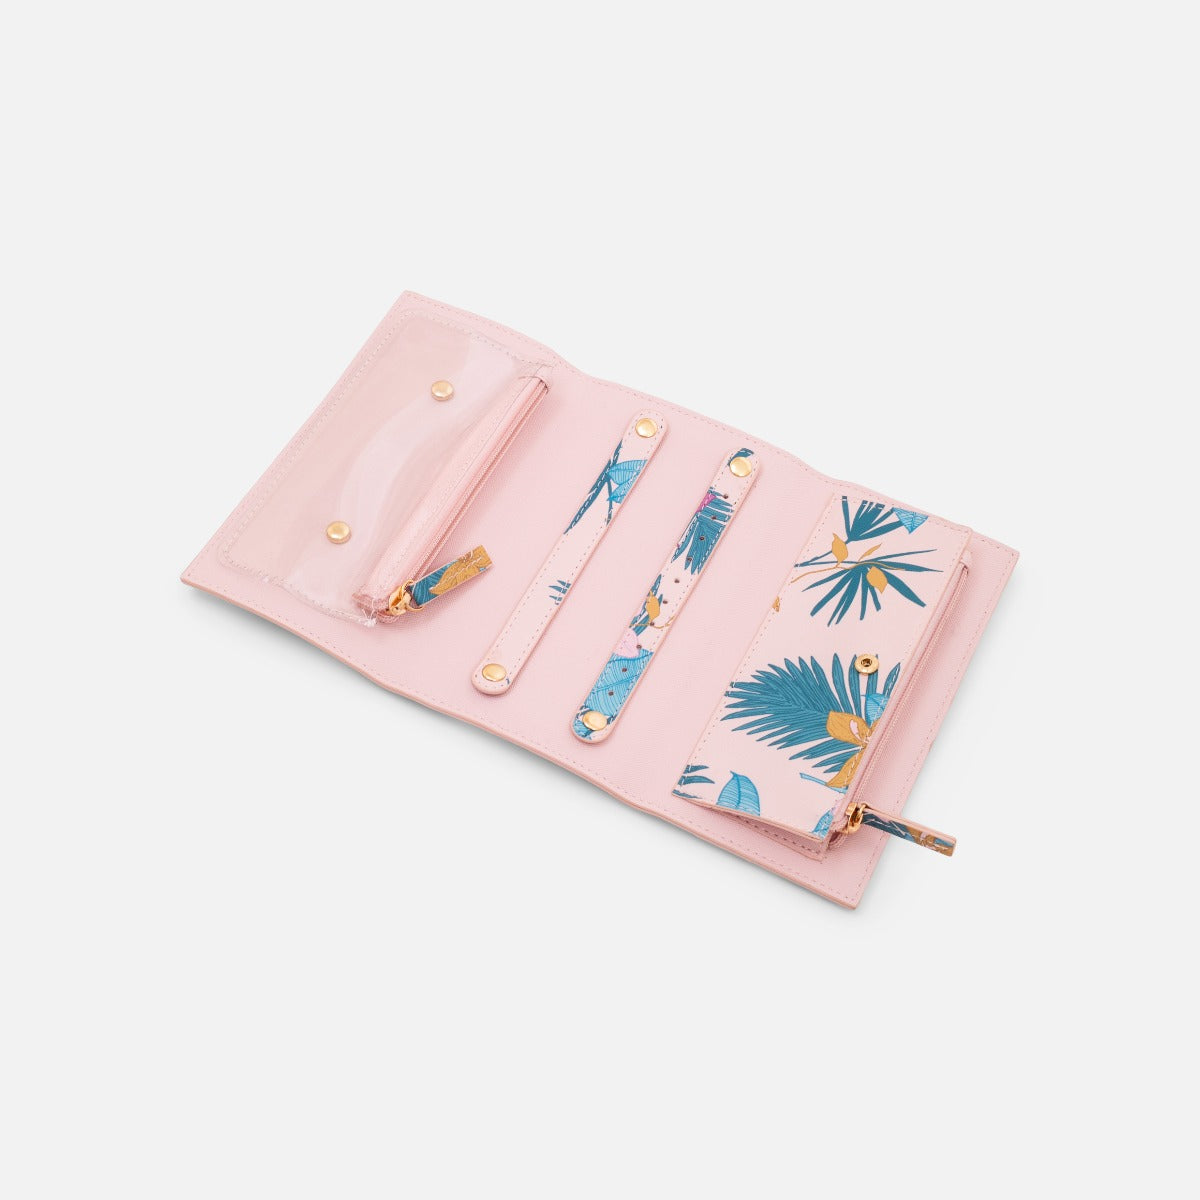 Foldable jewelry organizer with tropical print